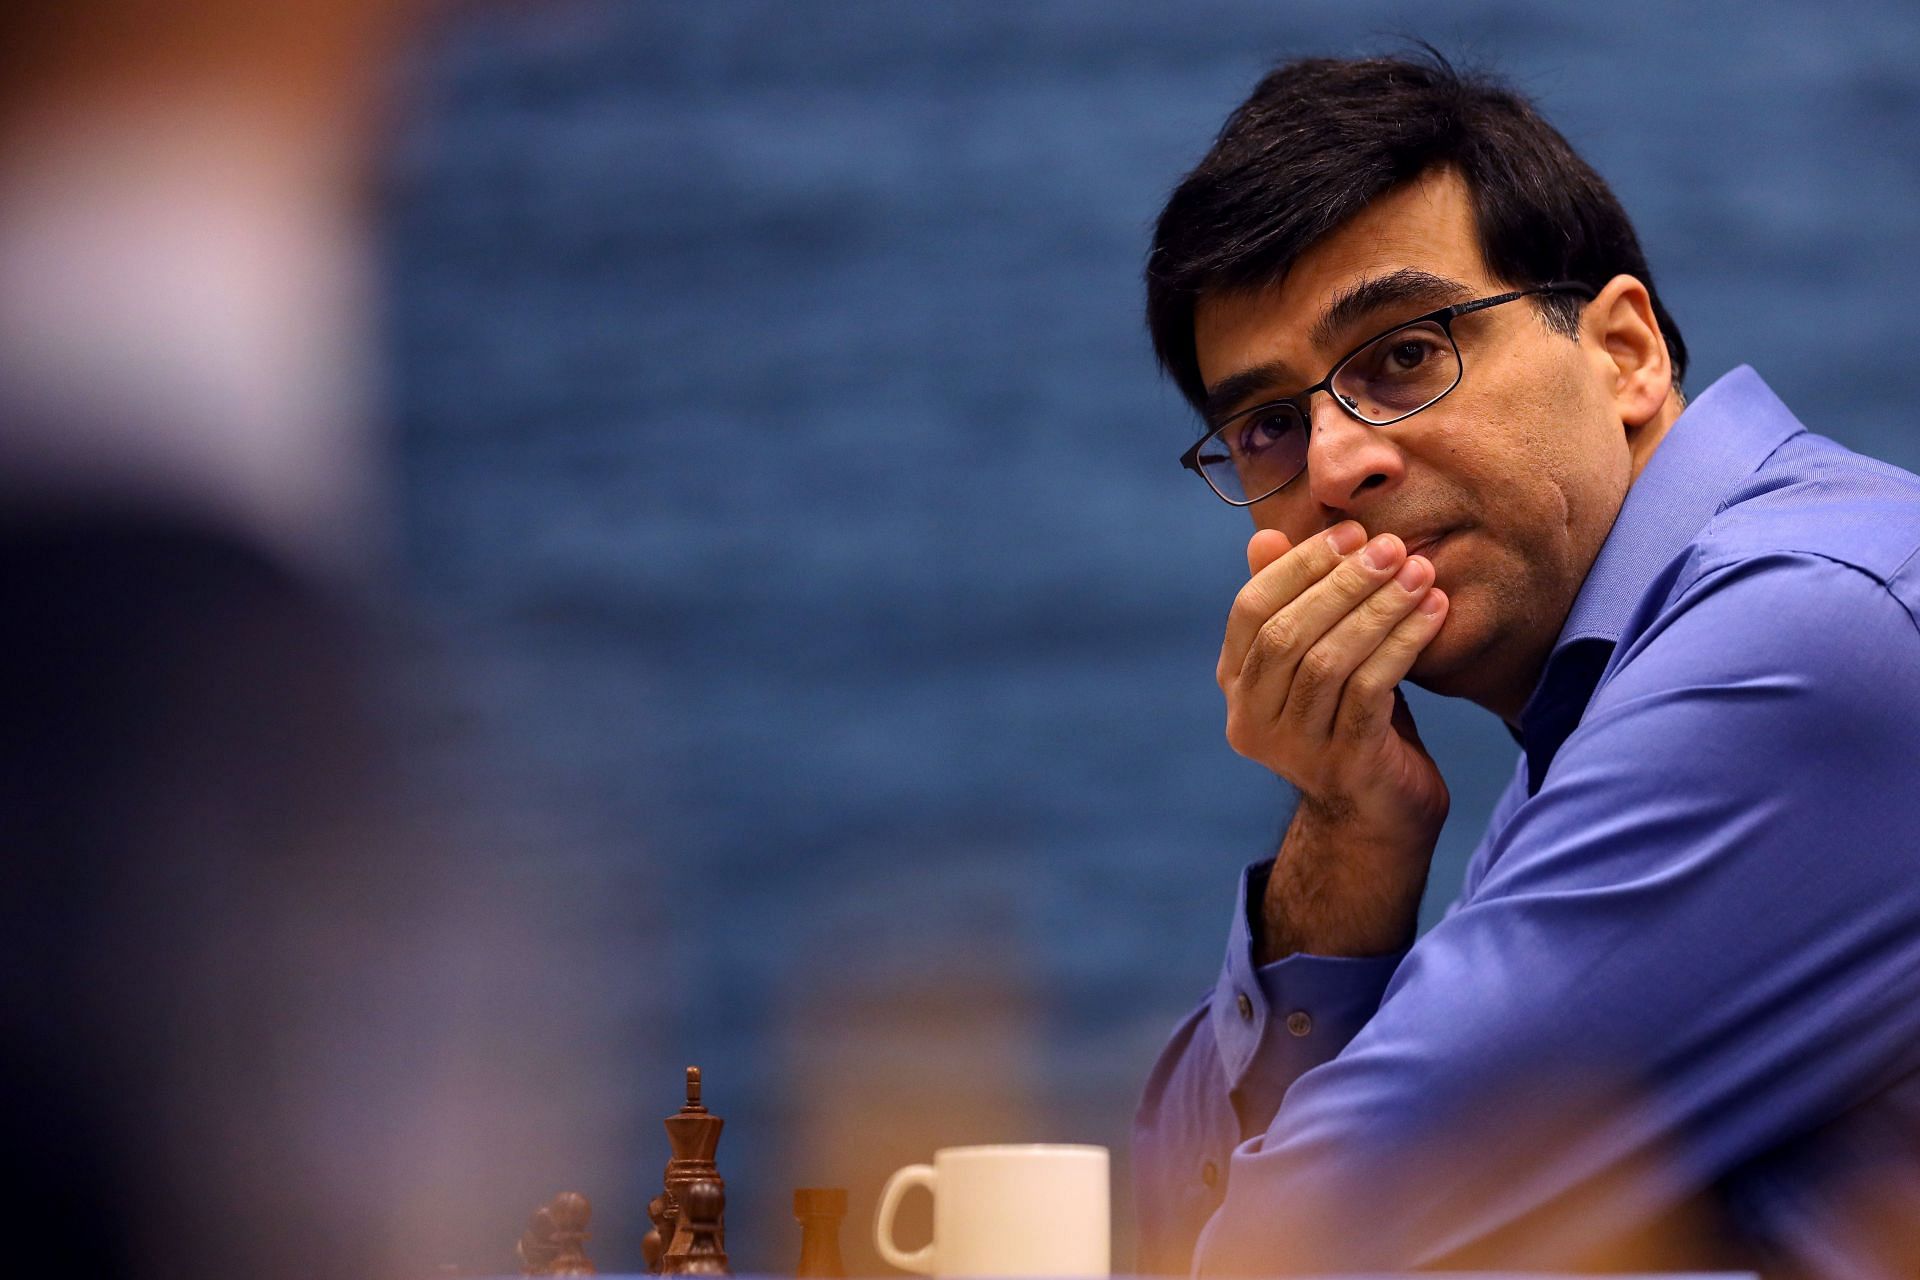 Gukesh D moves past Viswanathan Anand in FIDE live world rankings